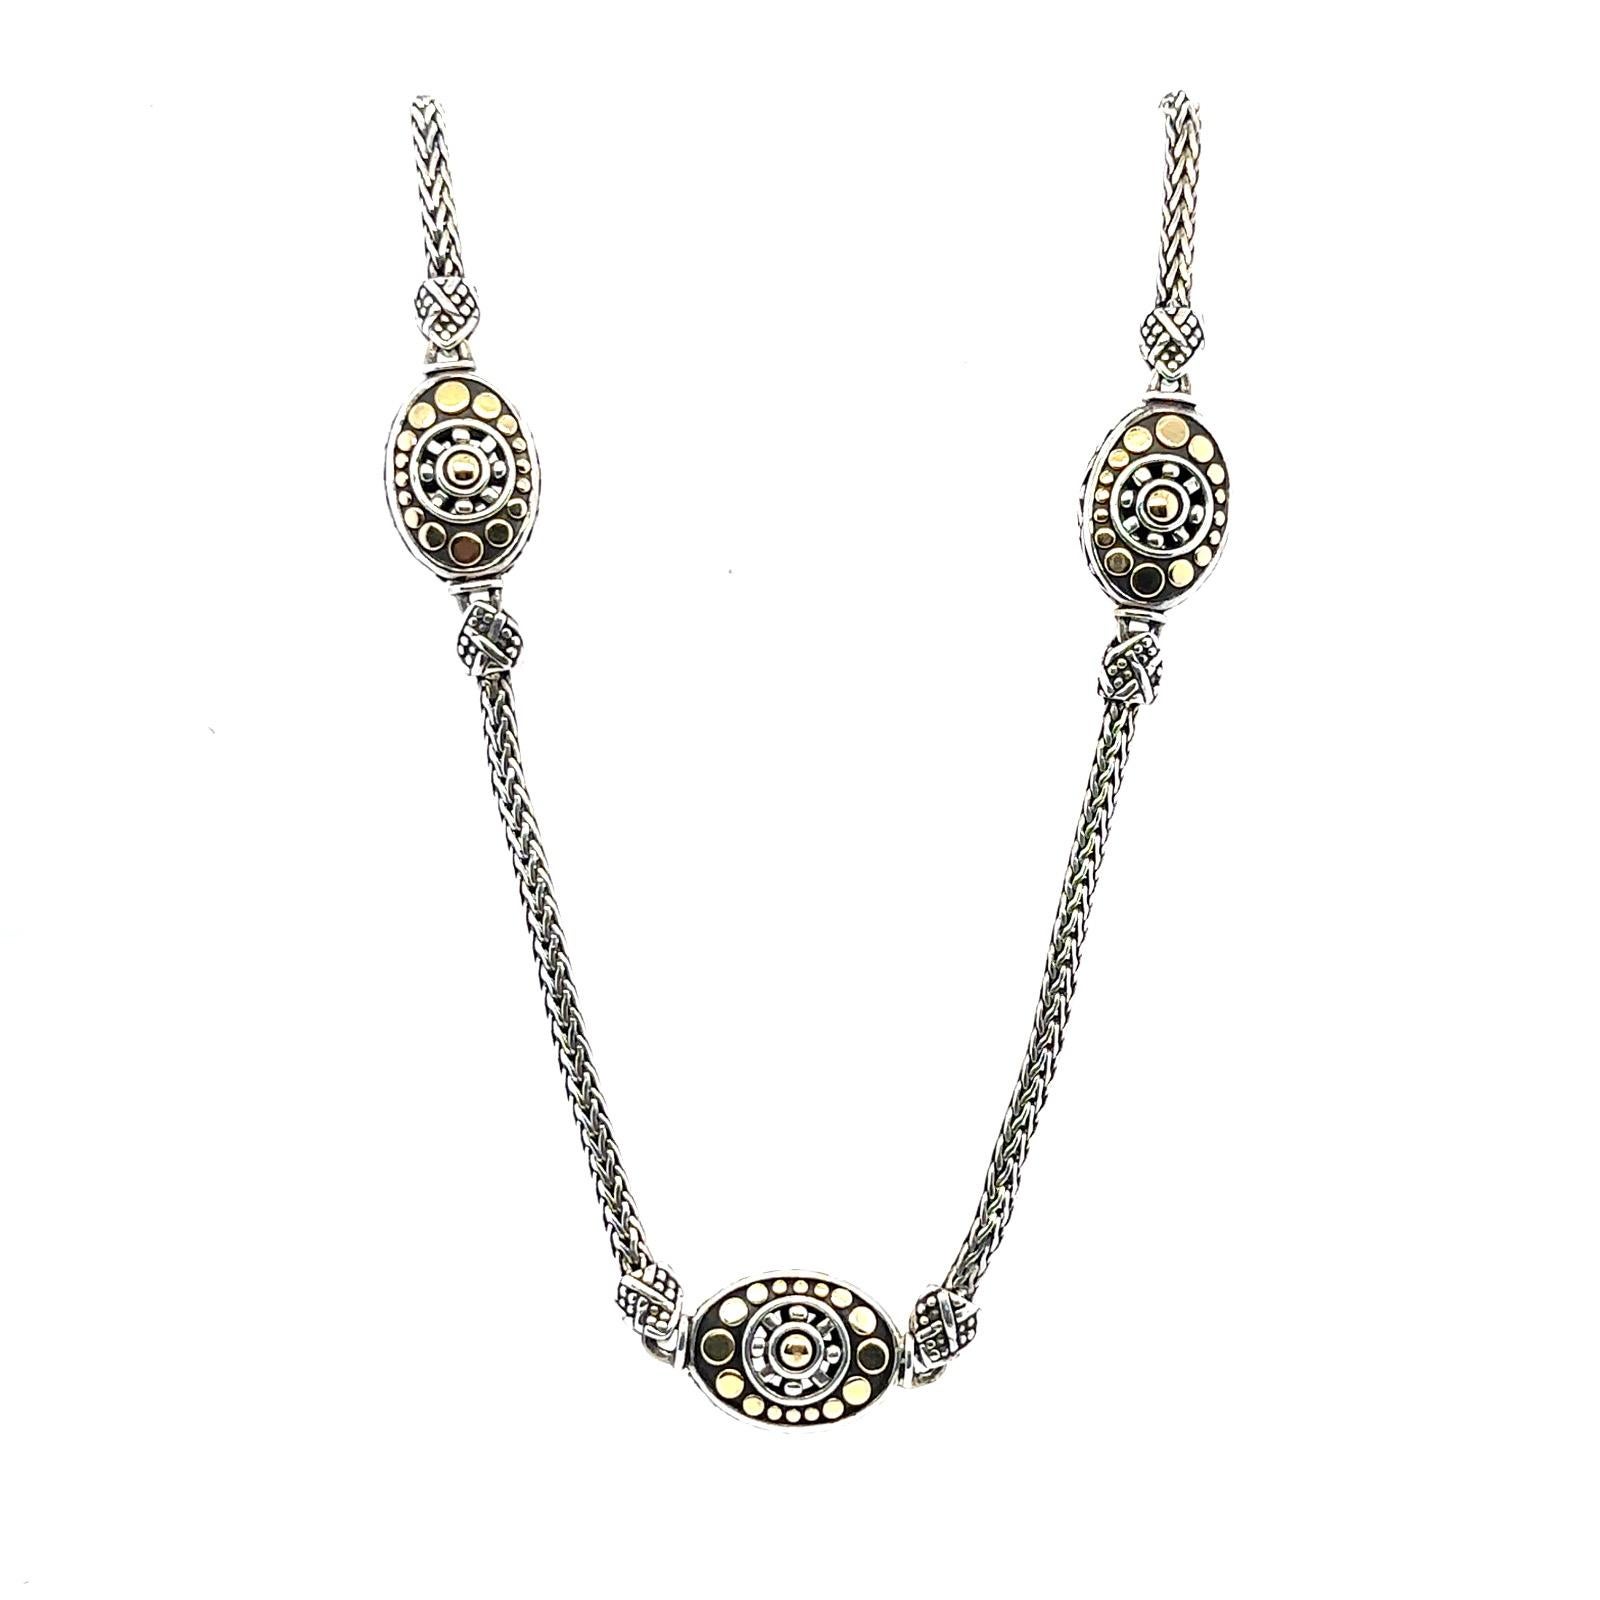 From designer John Harvey a 925 Sterling Silver necklace with silver and 18k yellow gold ovals. Chain is 16